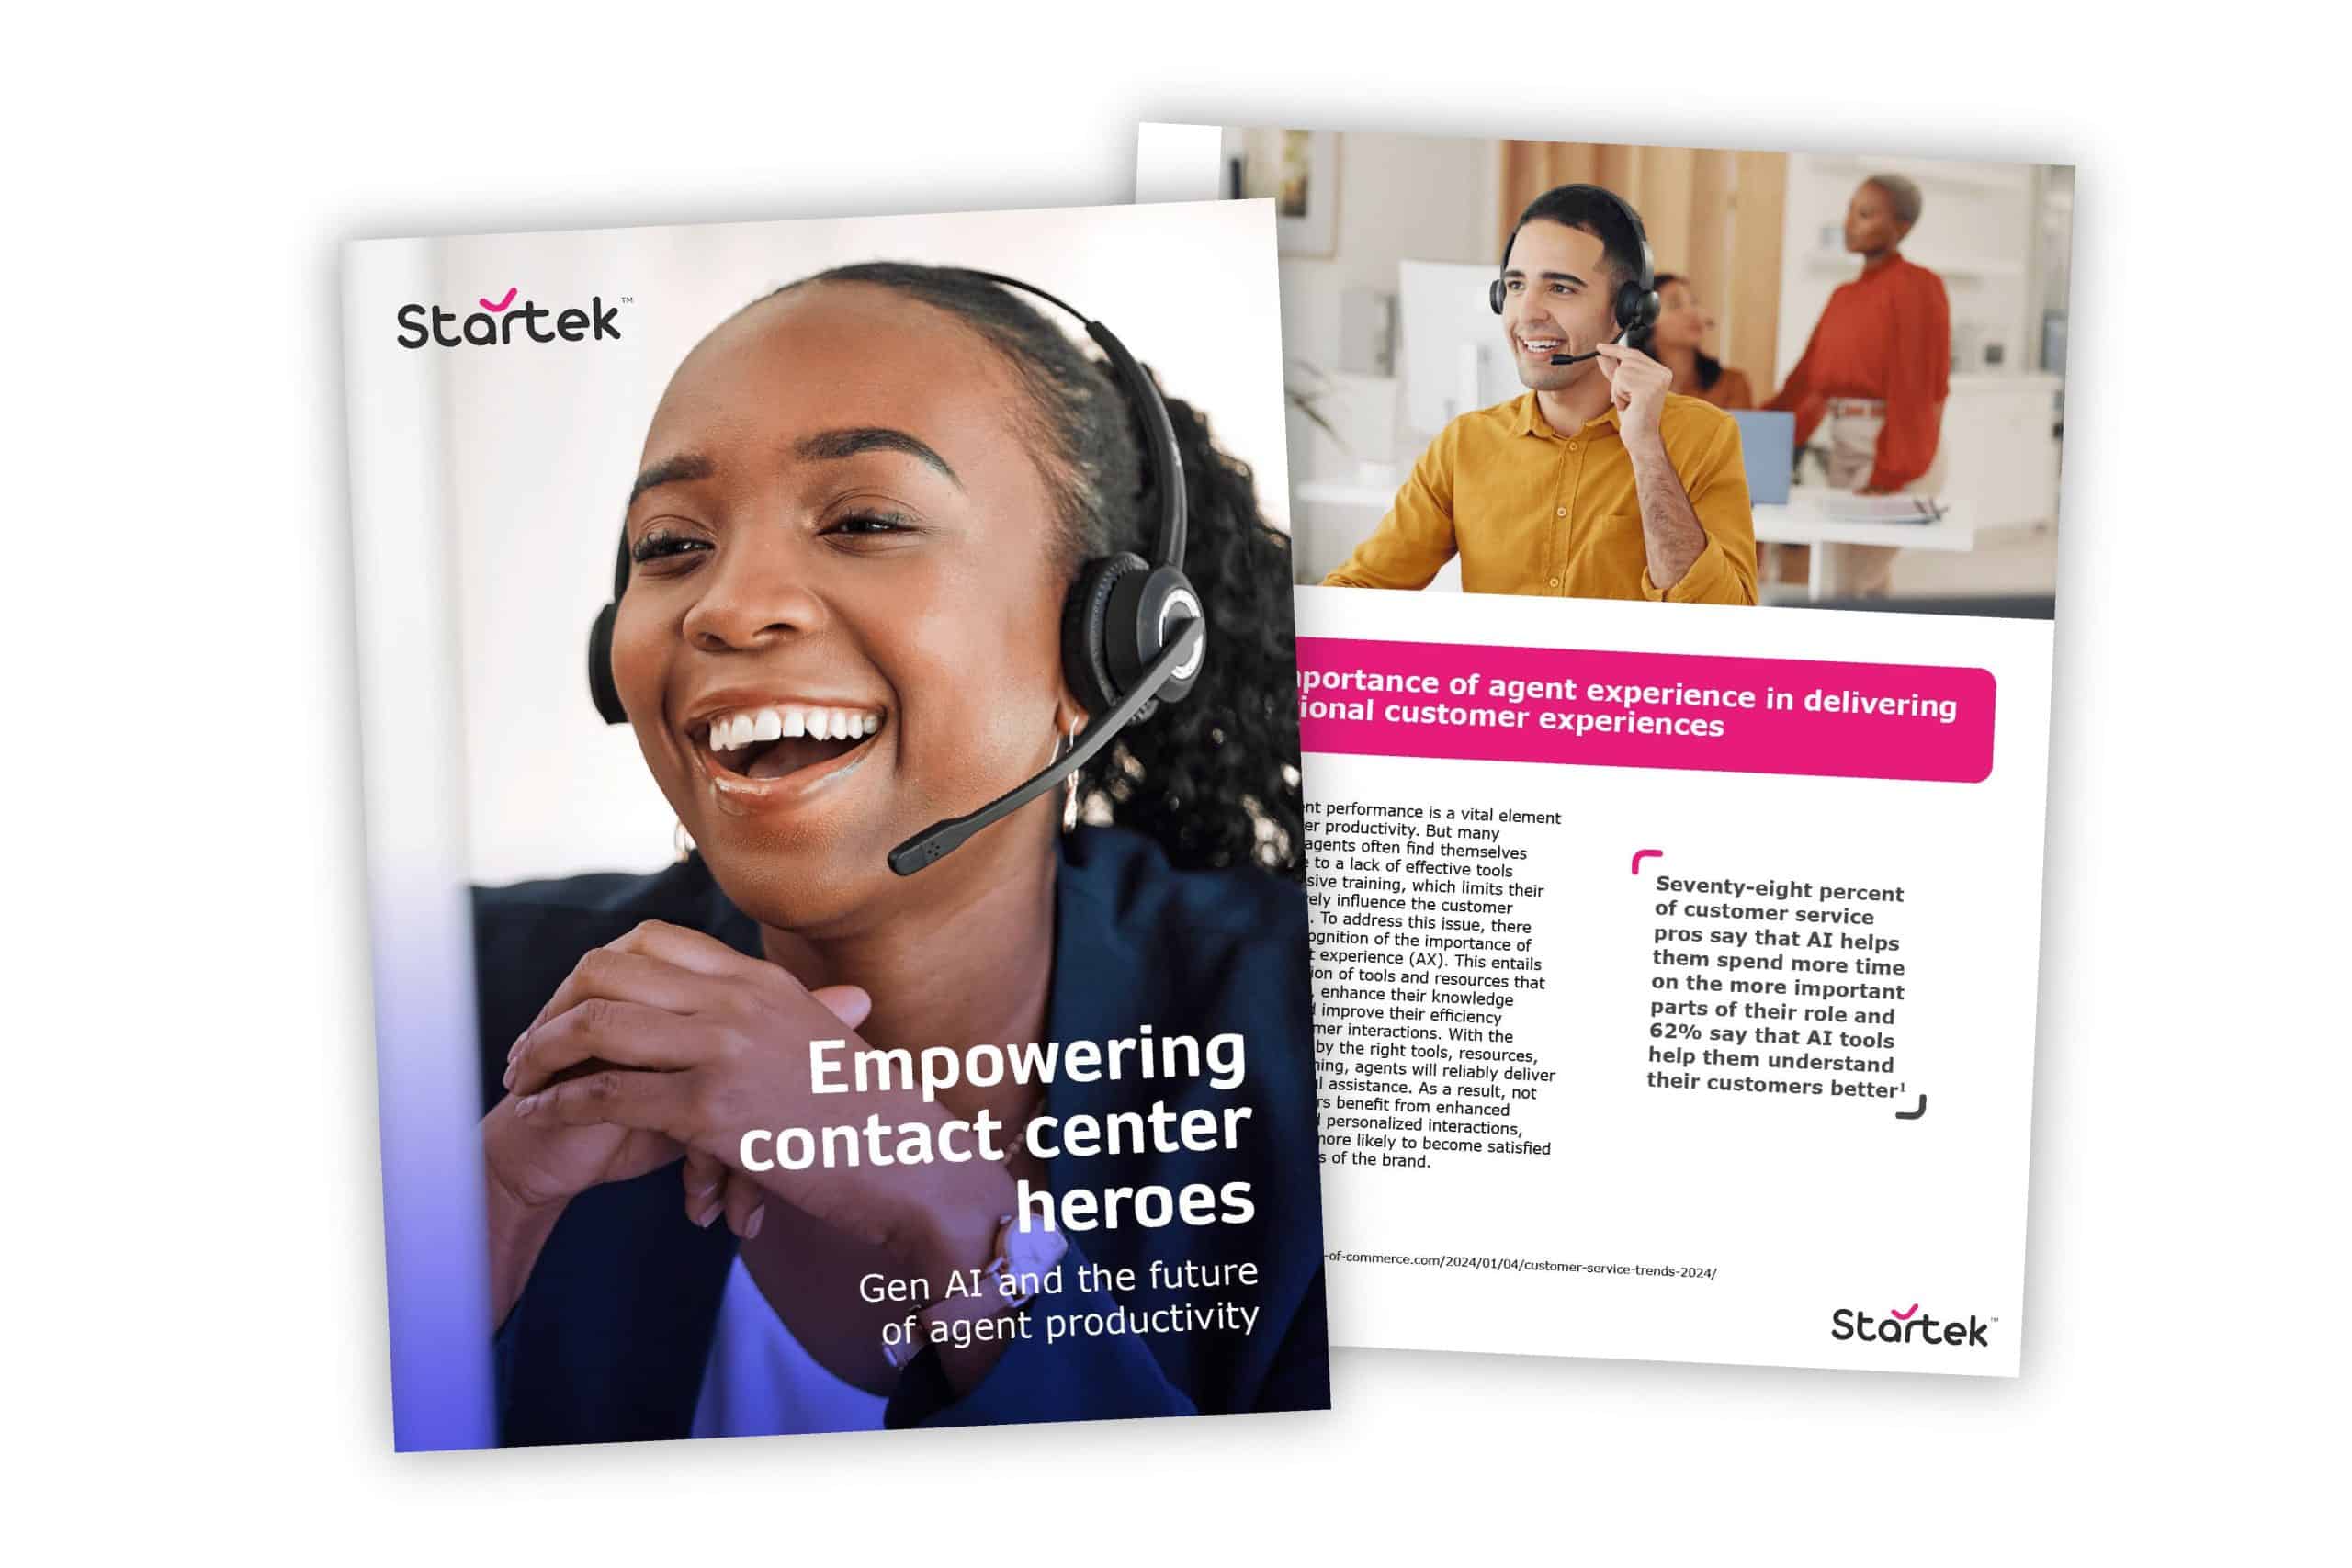 Empowering contact center heroes